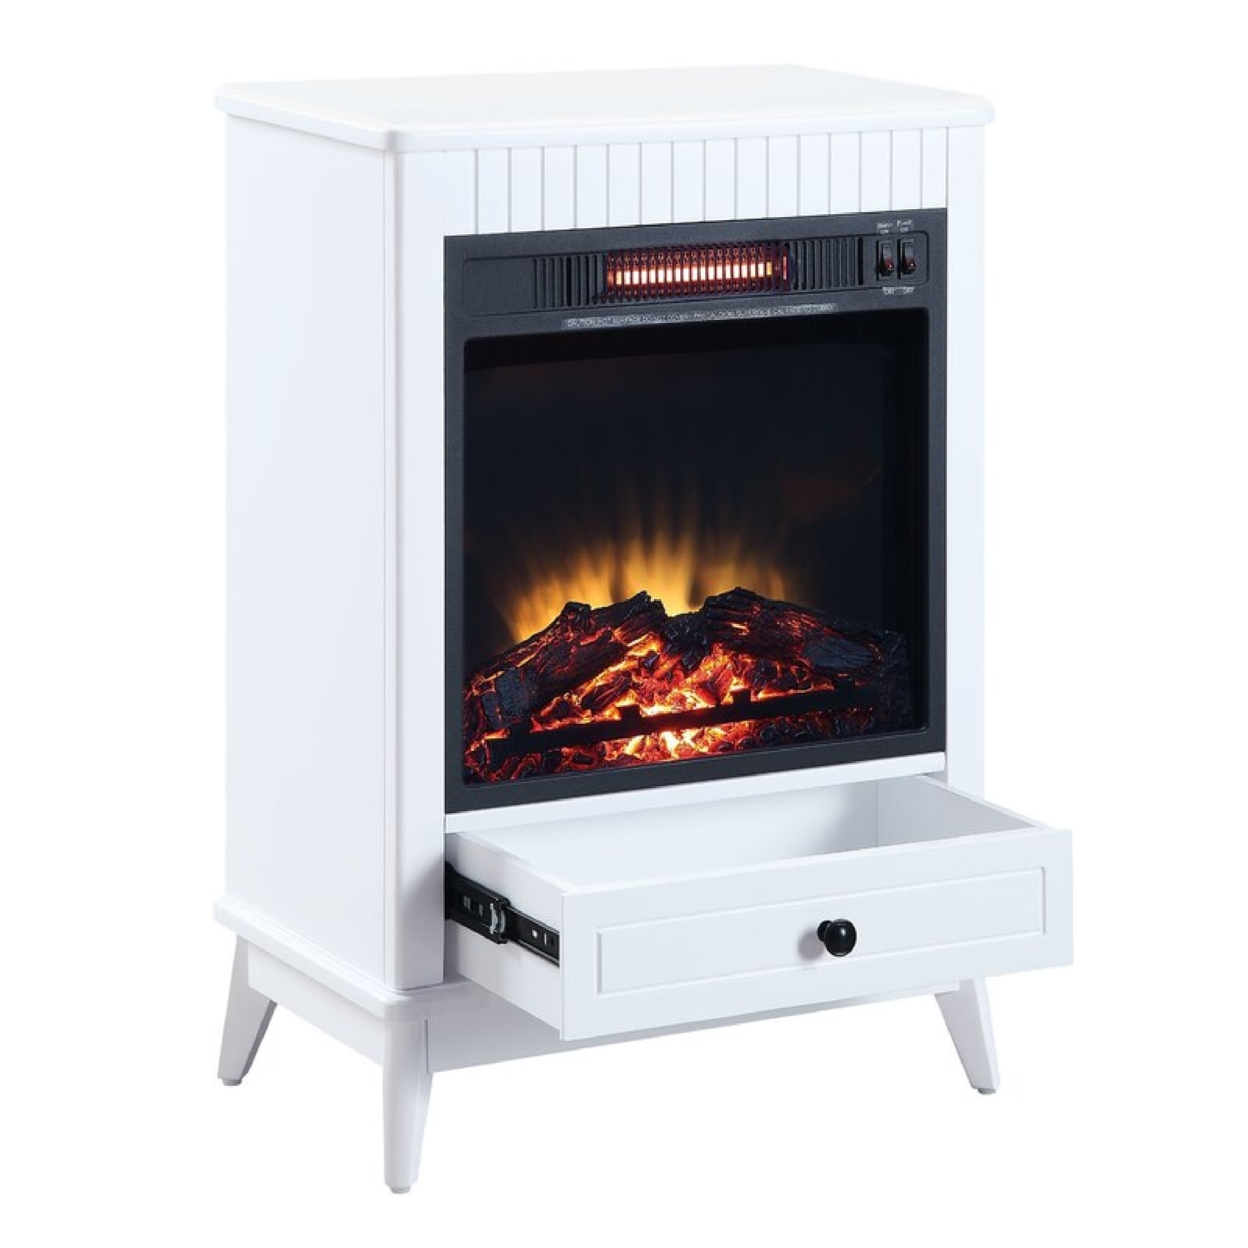 Etu 32 Inch Wood End Table With LED Electric Fireplace, 1 Drawer, White- Saltoro Sherpi